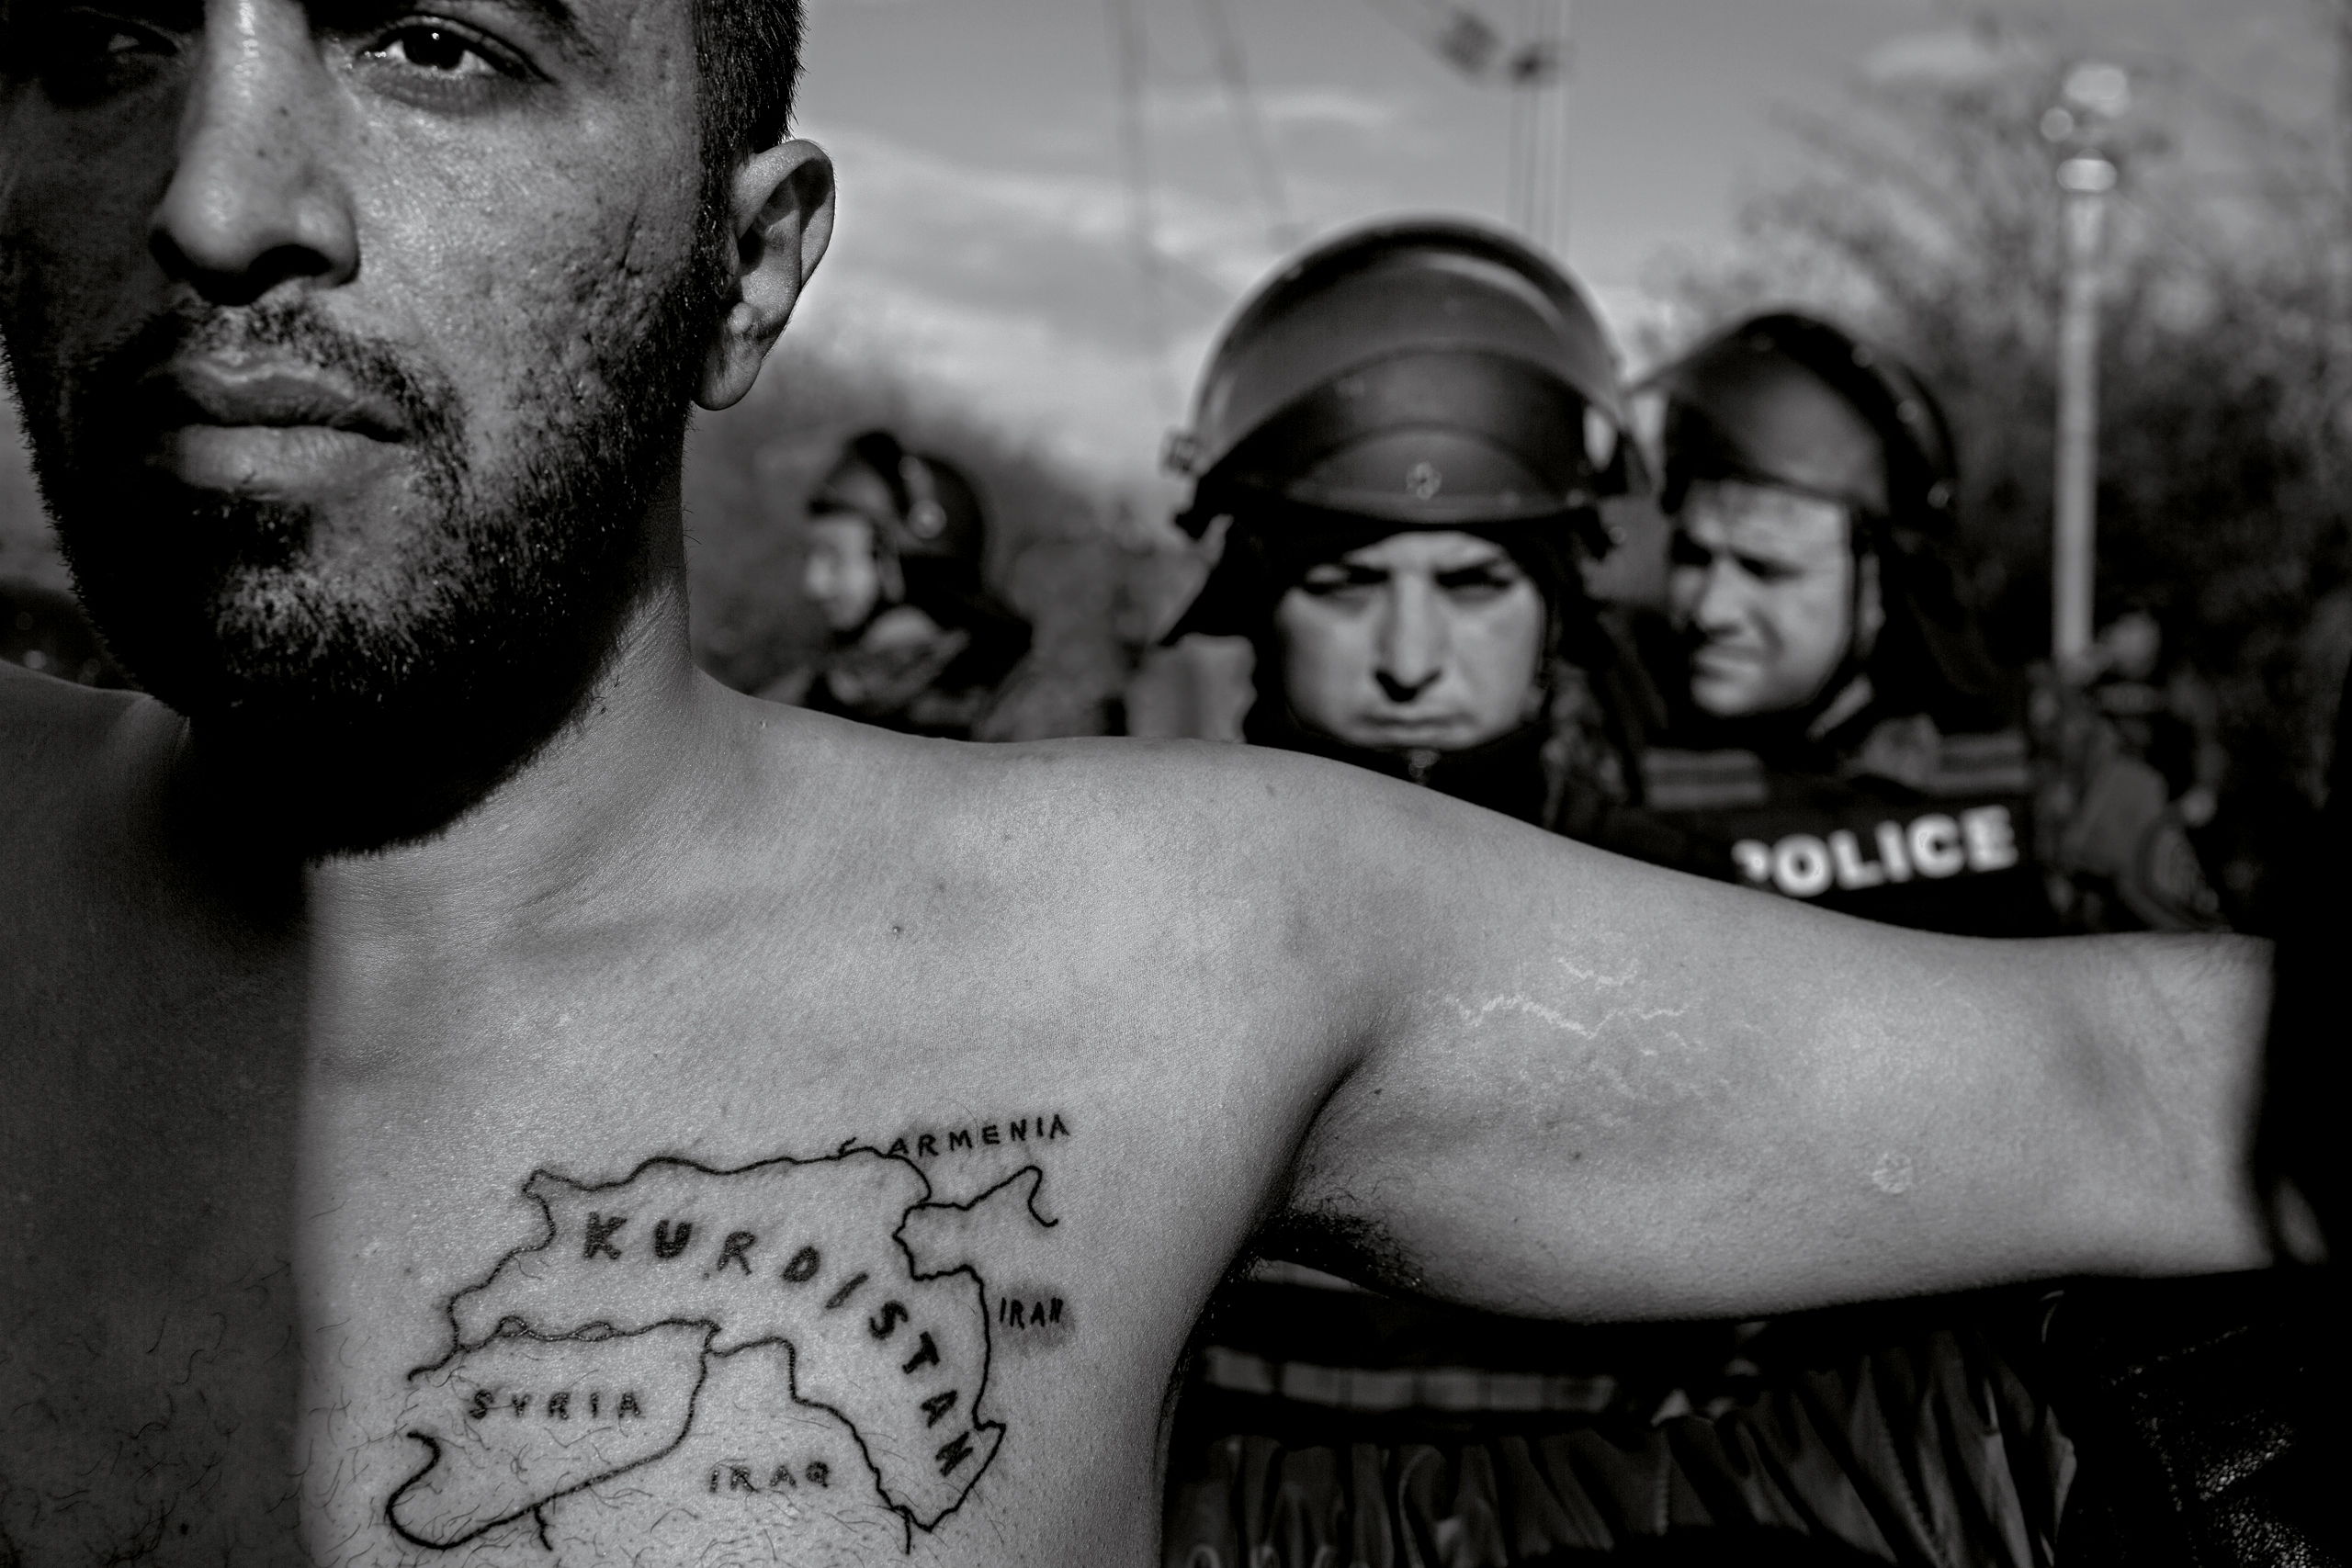 A man spreads his arms in a bid to defuse tension between migrants and police (James Nachtwey for TIME)